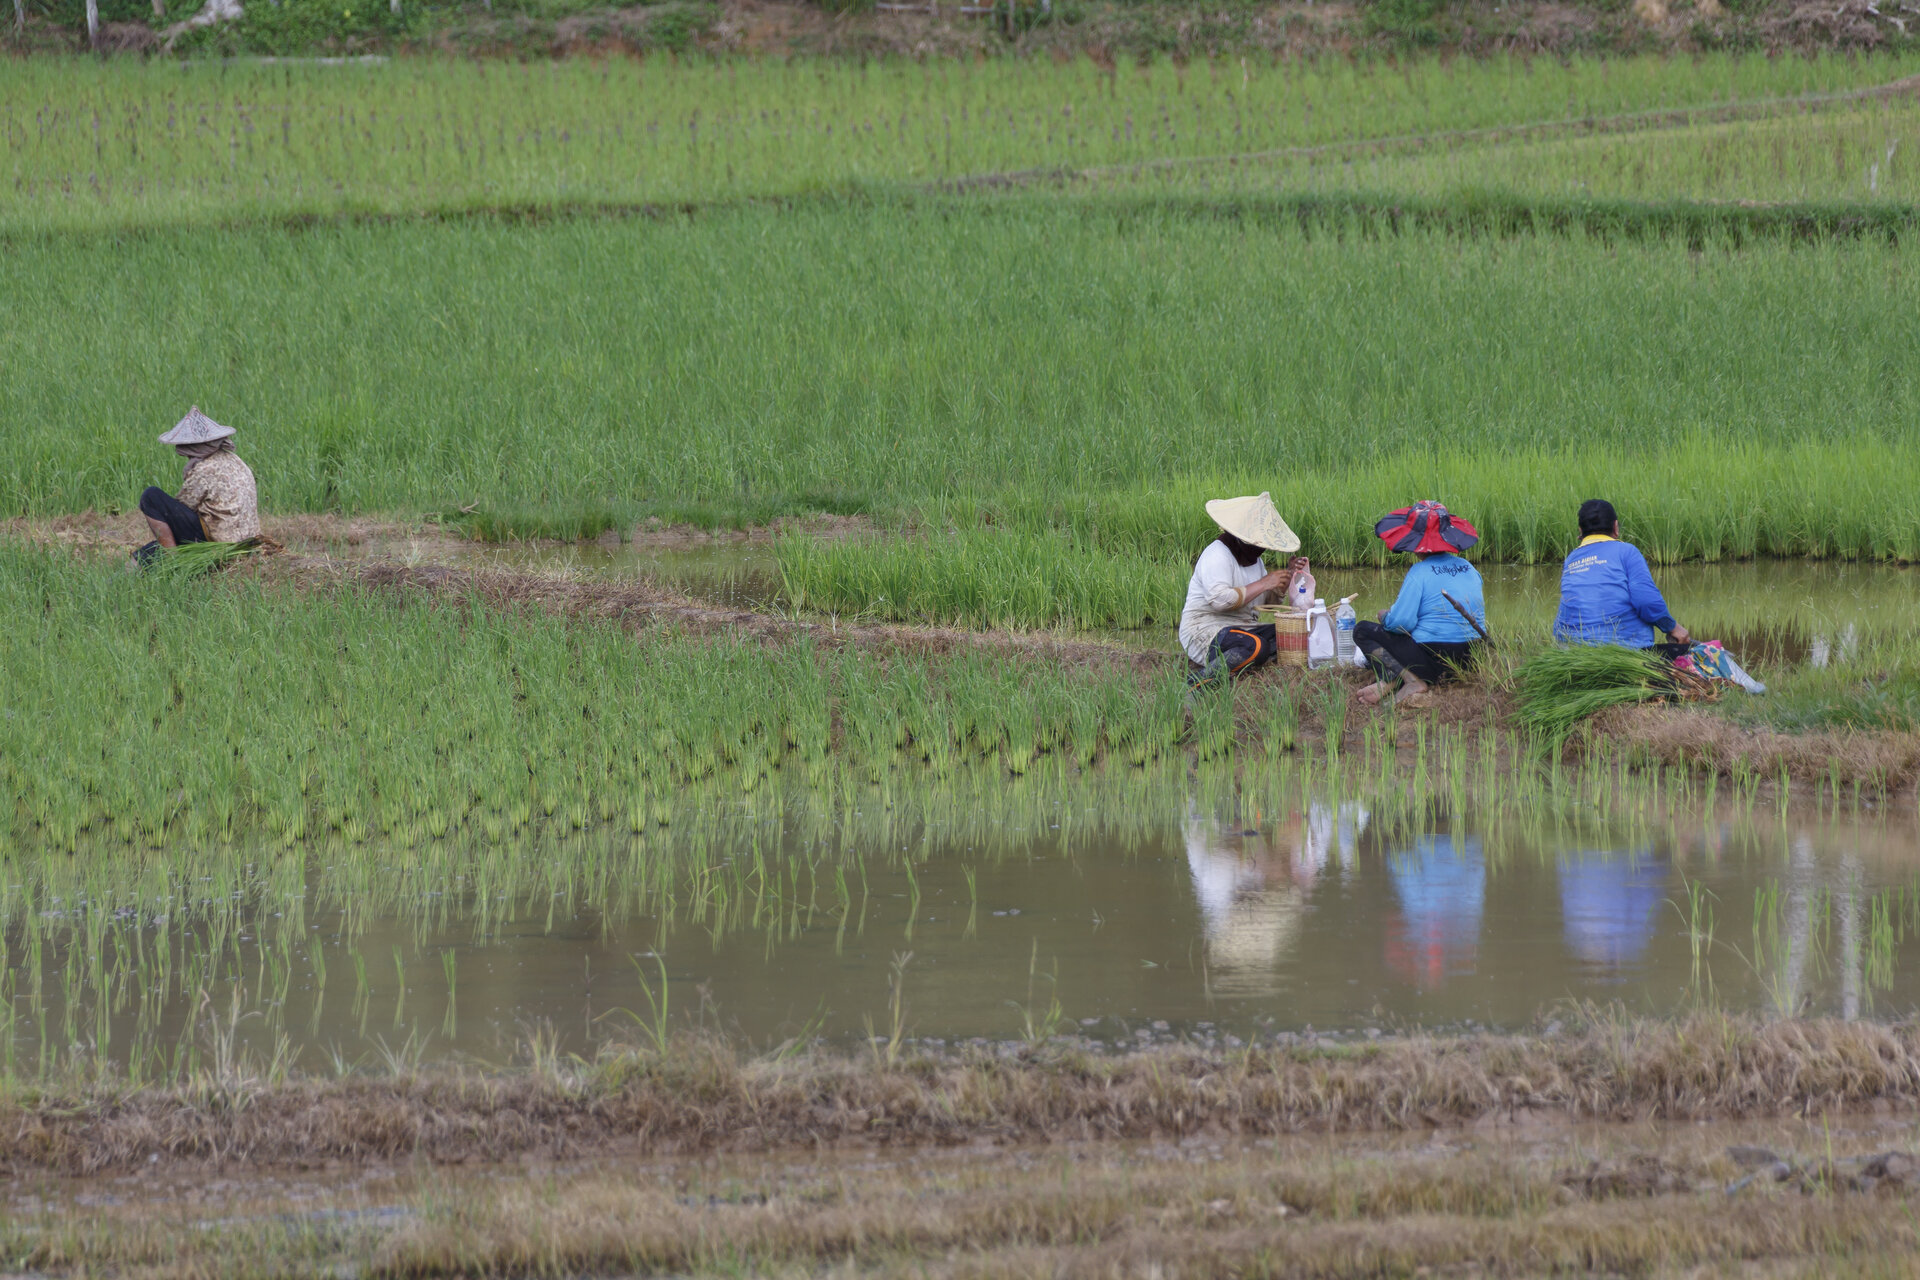 Rice cultivation is a major contribution to global warming